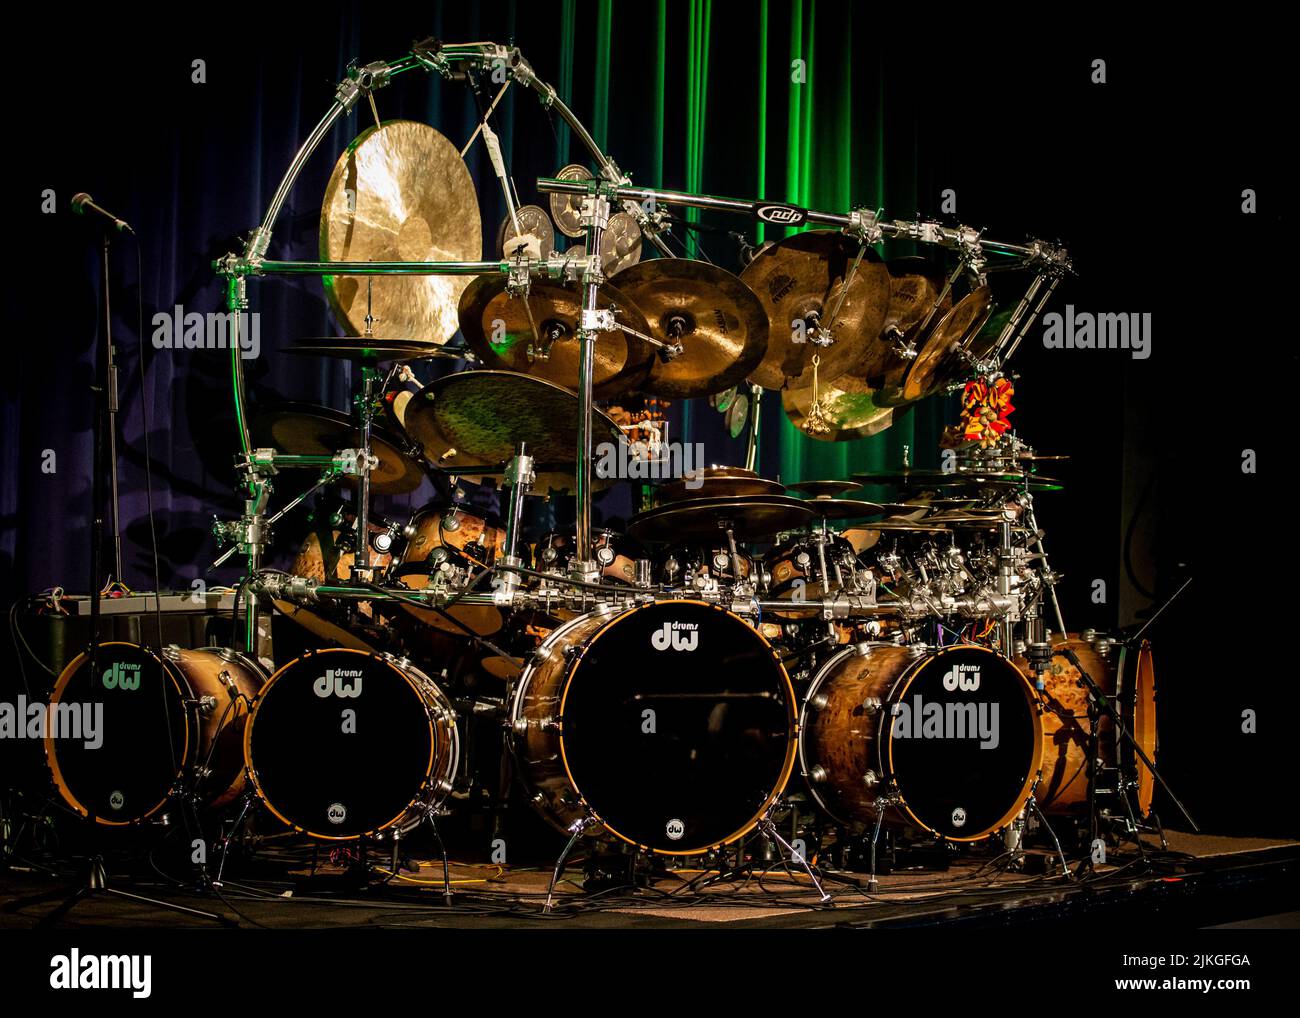 The Biggest Drum Set Kit In The World Stock Photo - Alamy